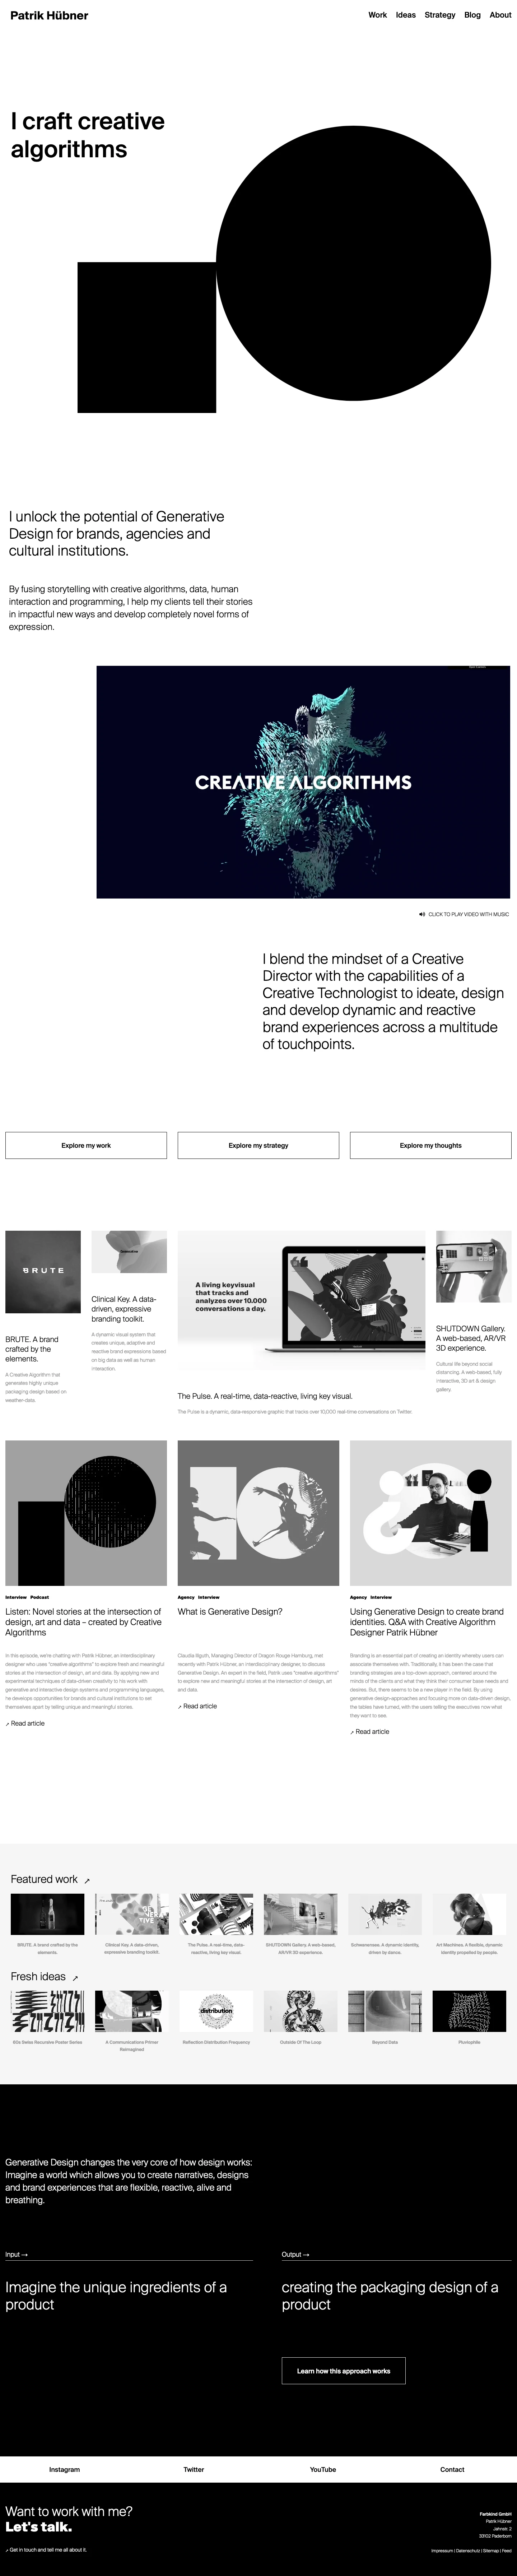 Patrik Hübner Landing Page Example: Generative Design and Creative Coding for brands, agencies and cultural institutions. A fusion of storytelling, experience and branding with algorithms, human interaction, data, artificial intelligence and programming.